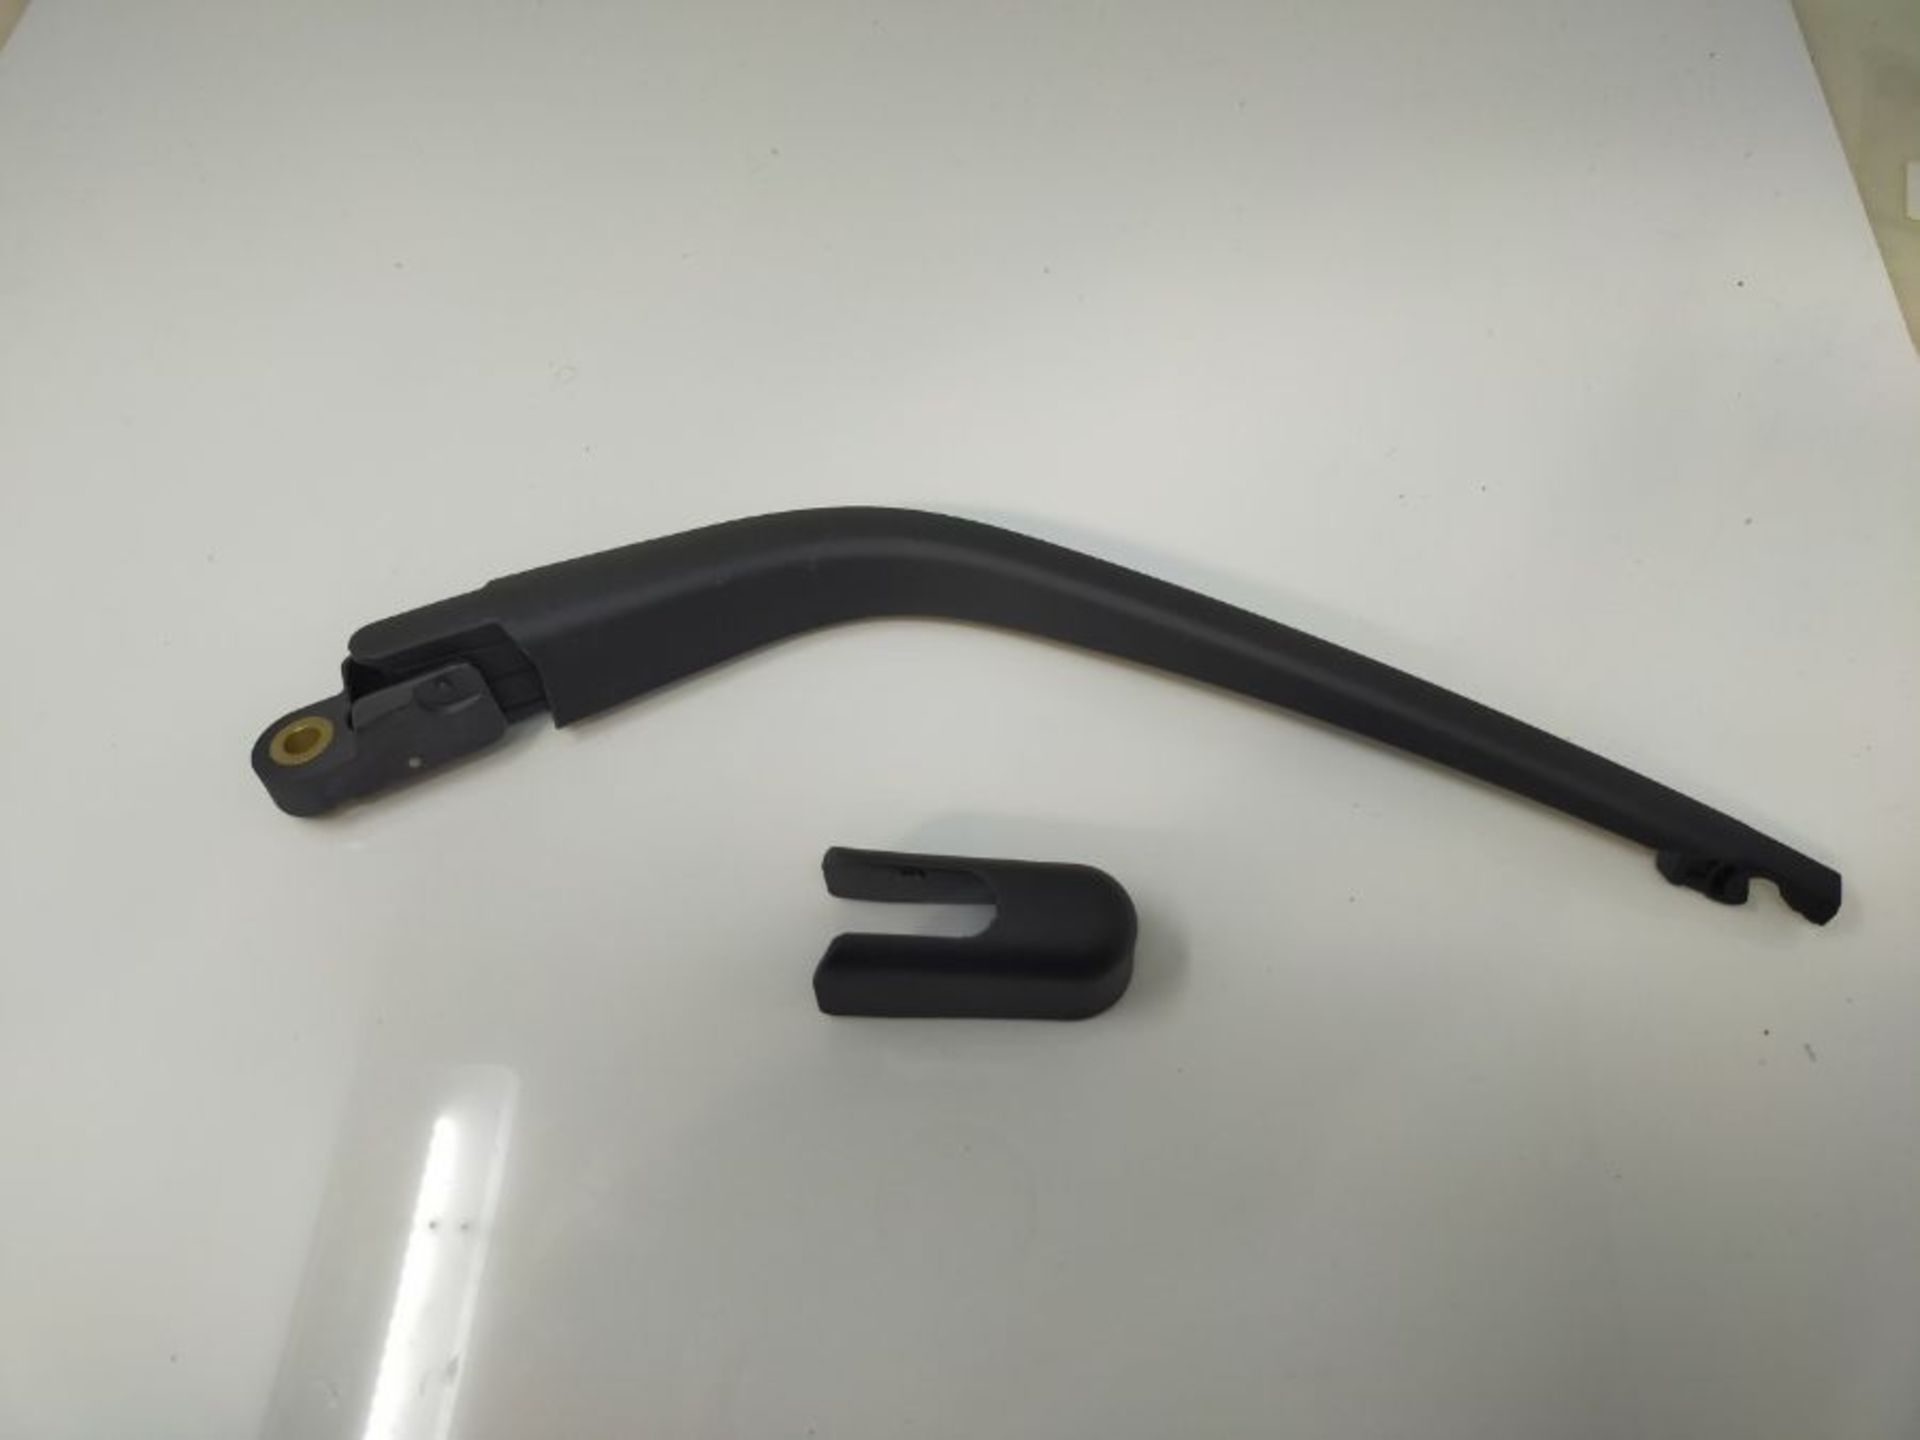 [INCOMPLETE] Rear Wiper Arm Blade, Replacement for Hyundai I10 2007-2013 - ZOFFI Back - Image 5 of 6